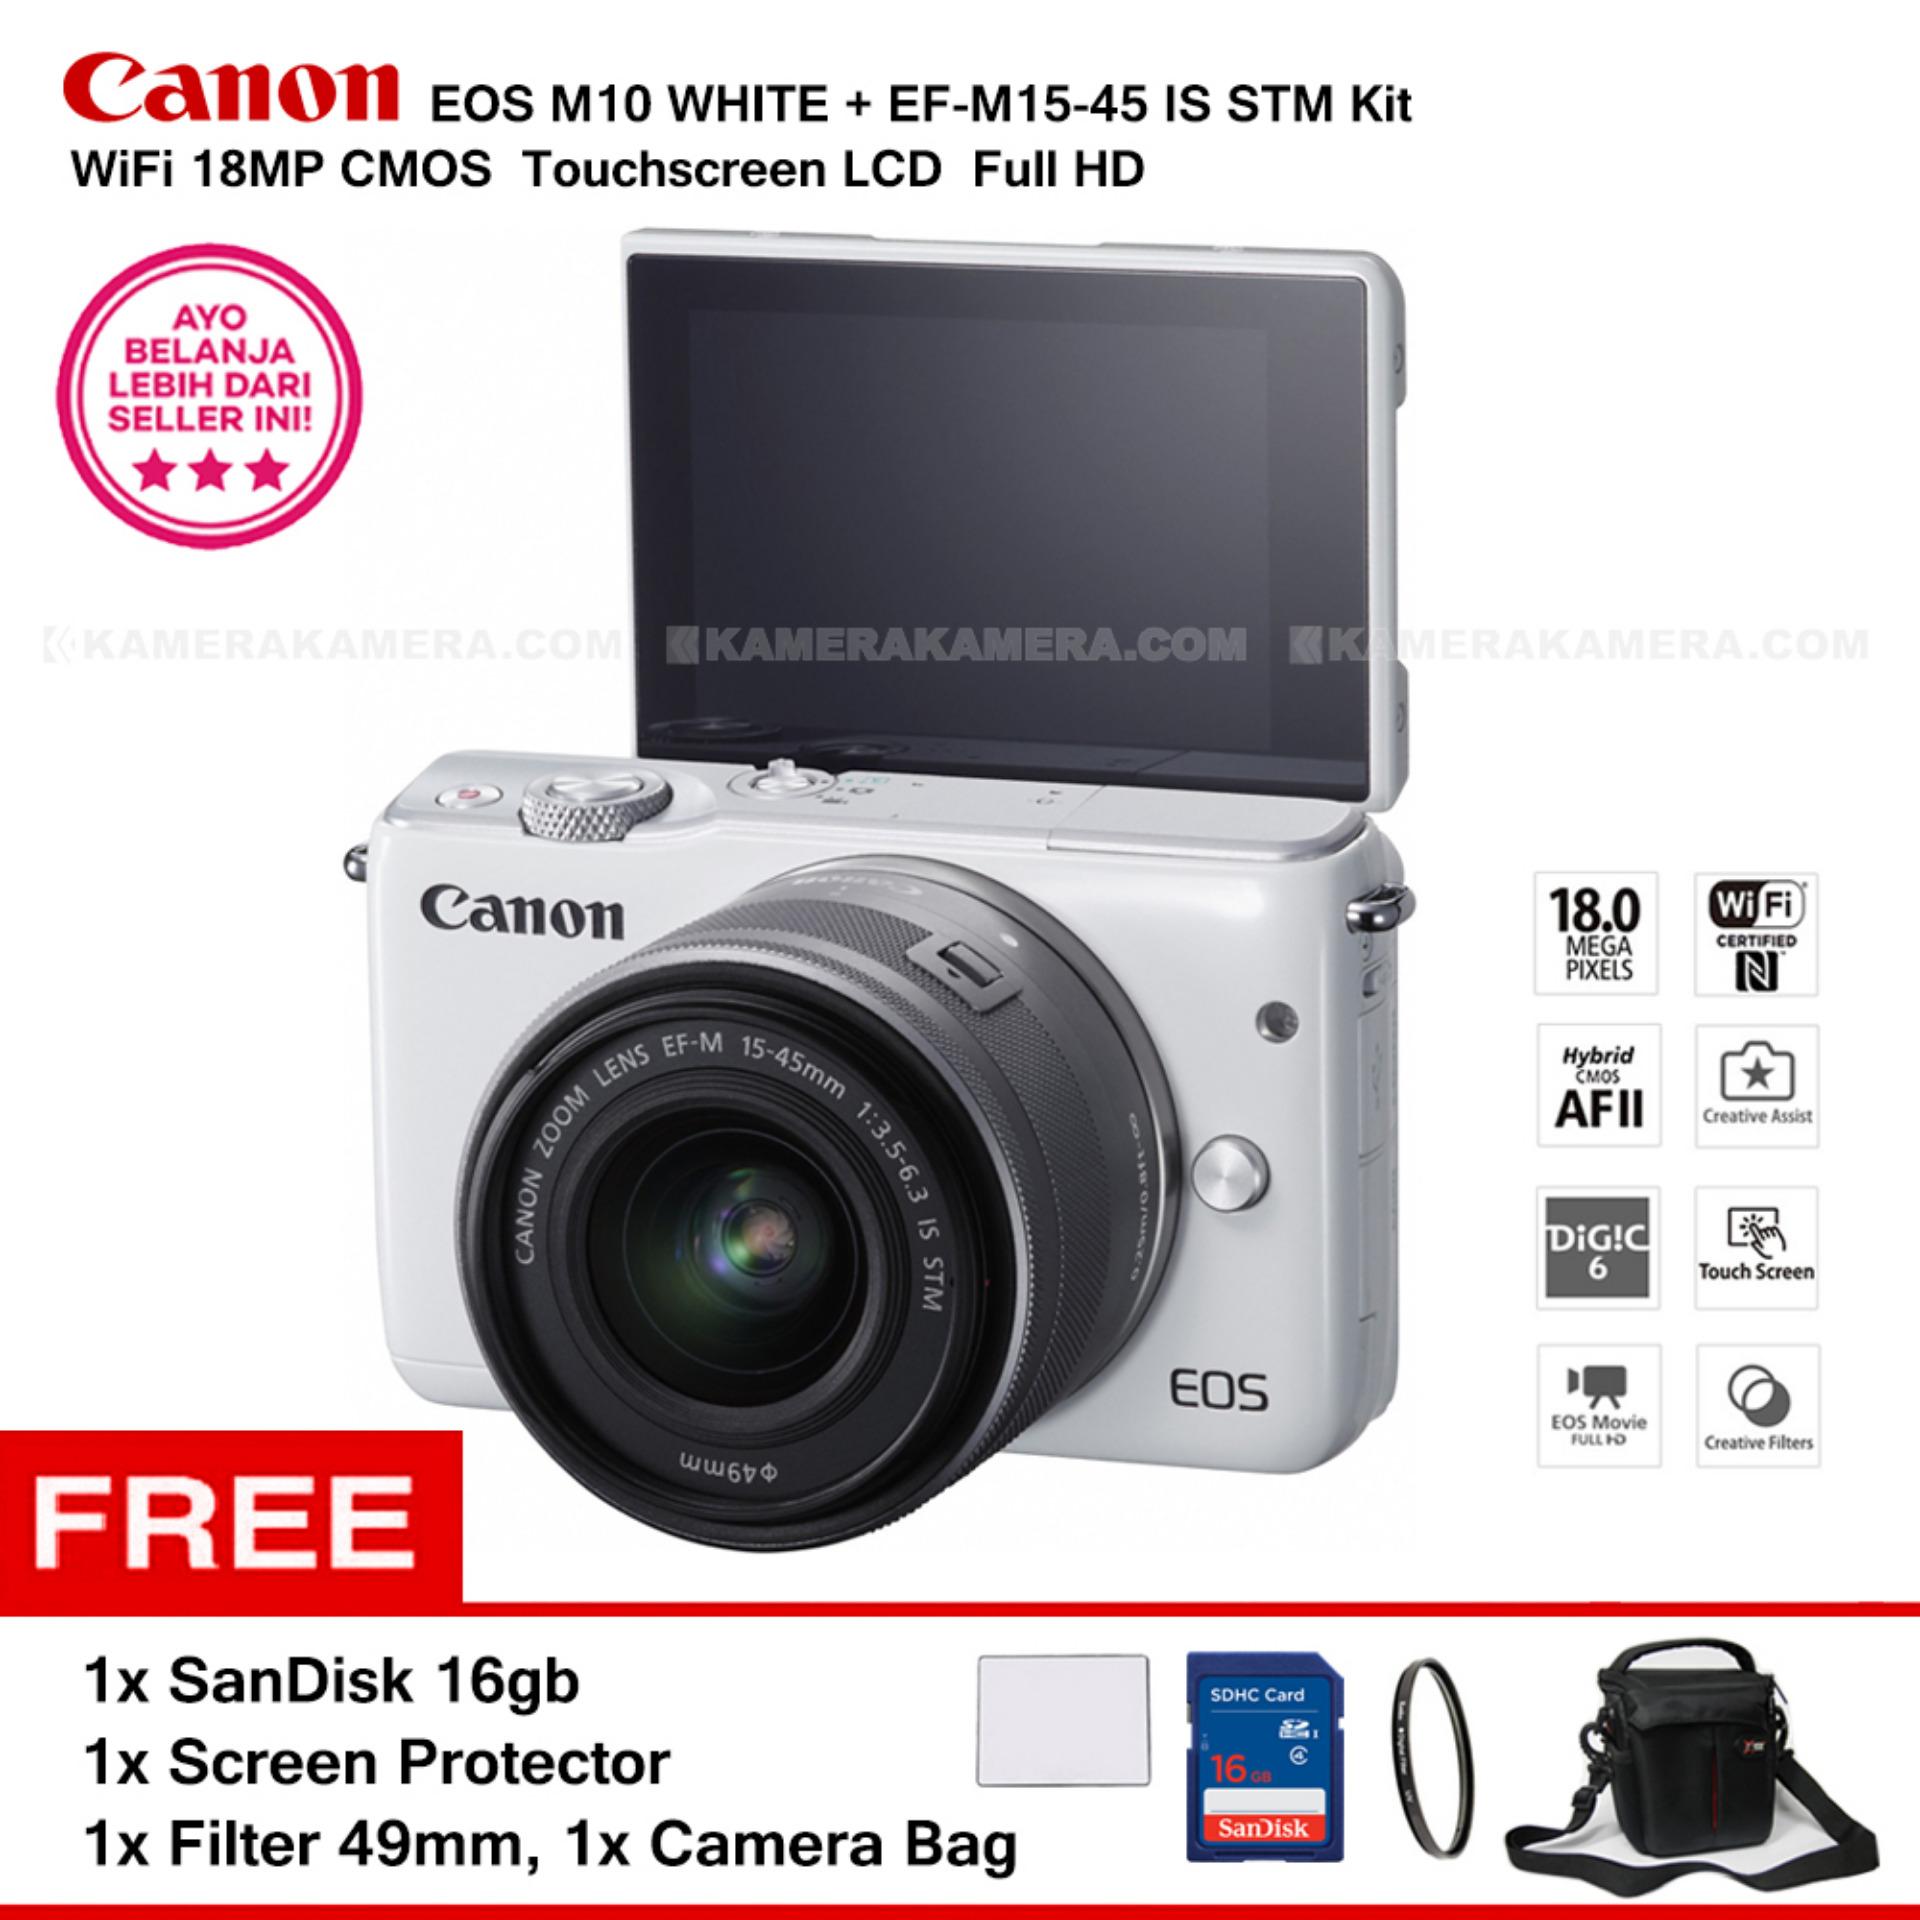 Canon EOS M10 (White) + EF-M15-45 IS STM Kit Wifi 18MP CMOS Touchscreen LCD Full HD + SanDisk 16GB + Screen Protector + Filter 49mm + Camera Bag